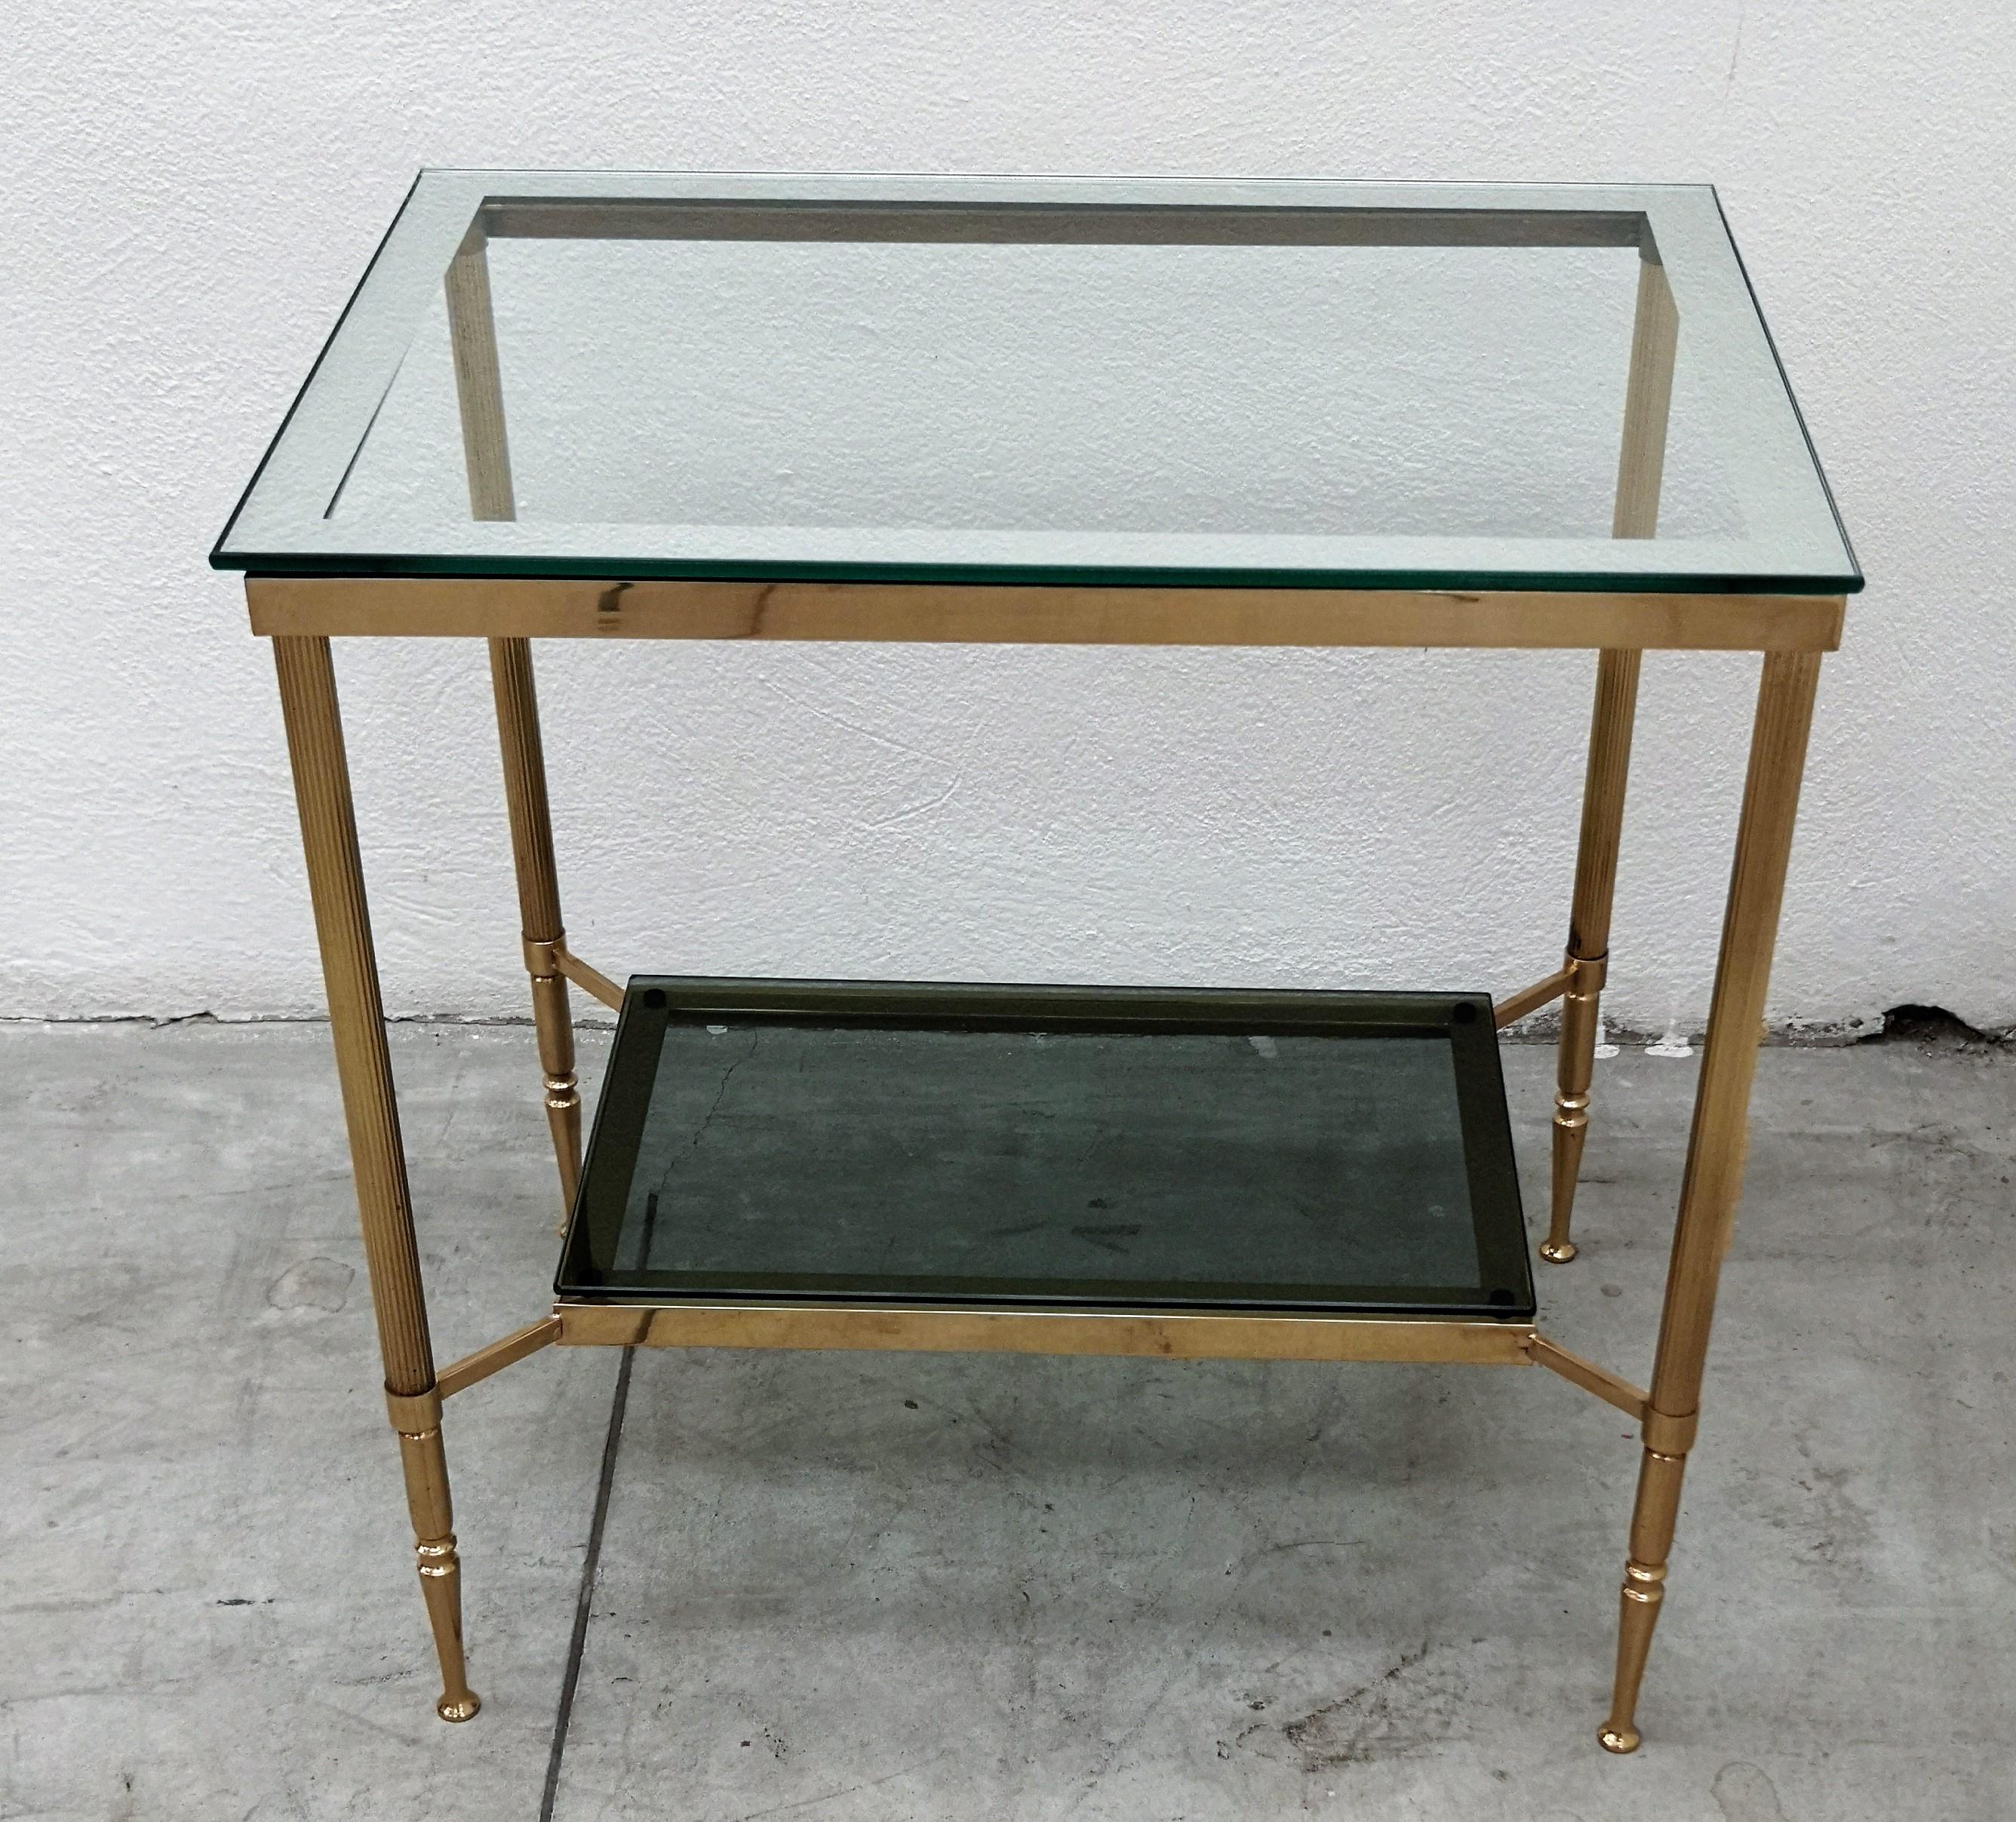 Beautiful and stylish vintage 1980s Italian brass and glass, smoked on the bottom and mirror framed on the top, two-tier side table, or coffee table or sofa table. Very good condition with great brass and glasses.

A great piece that perfectly